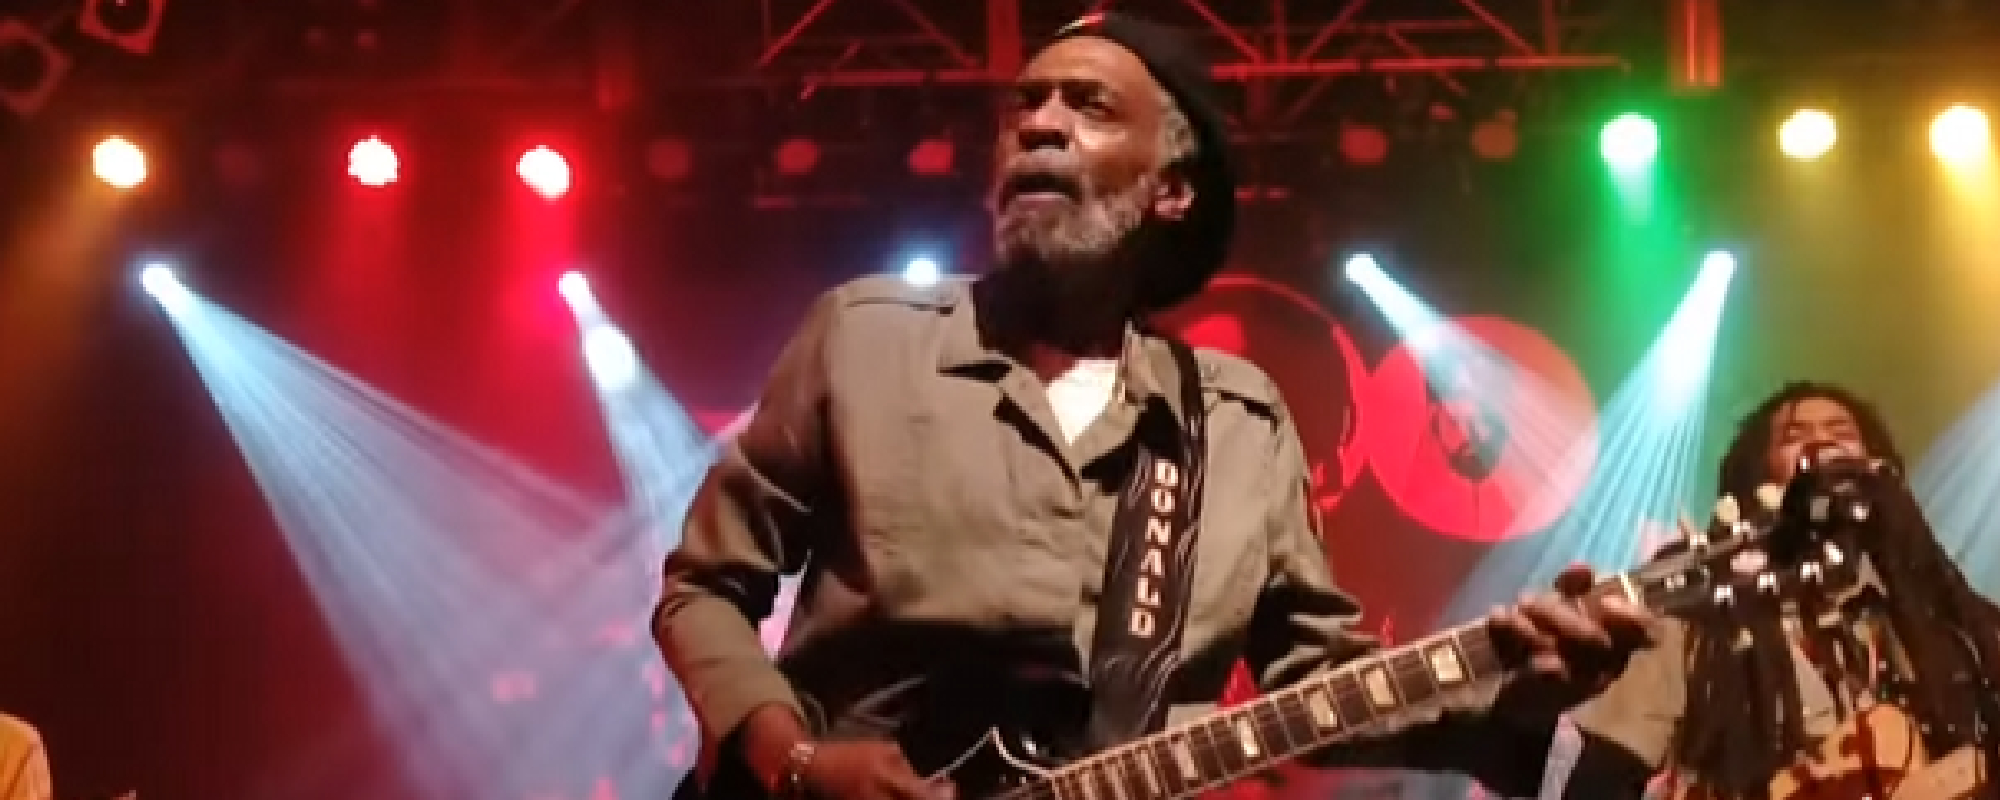 Bob Marley and The Wailers Guitarist Donald Kinsey Passes Away 3 Days After Fellow Band Member’s Death